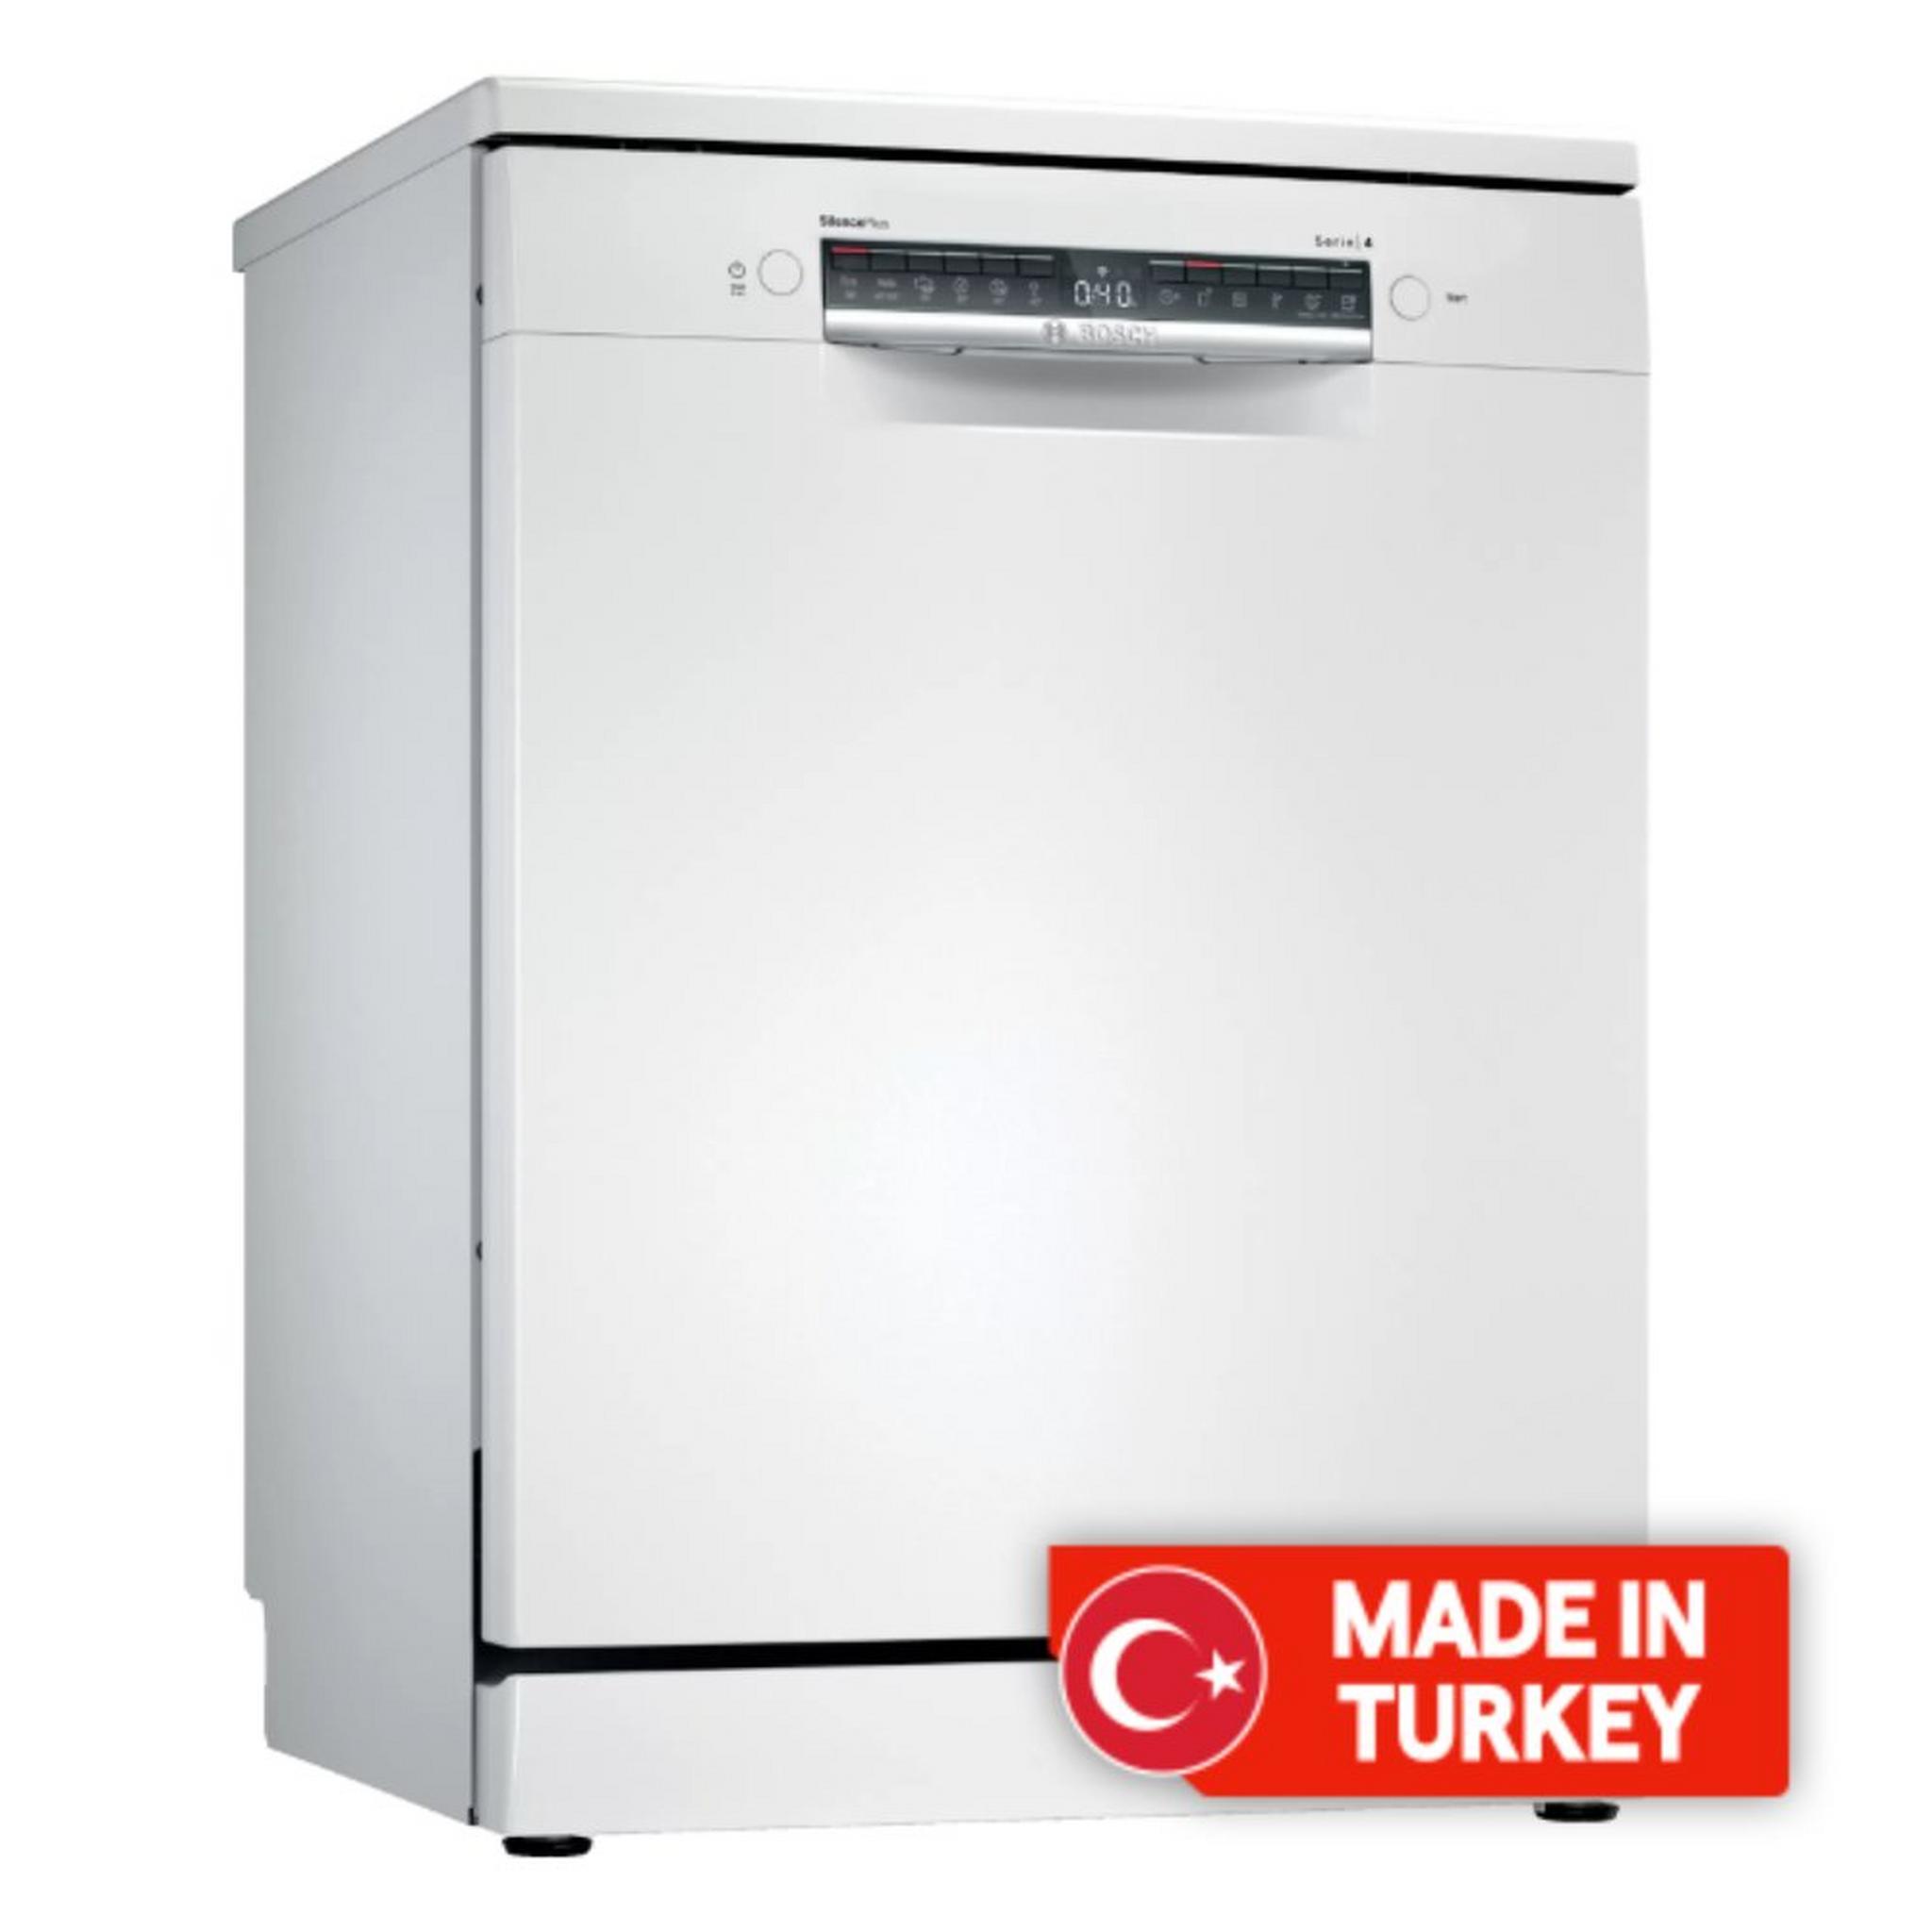 BOSCH Series 4 Free-Standing Dishwasher, 6 Programs, 13 Places Setting, SMS4HMW26M - White